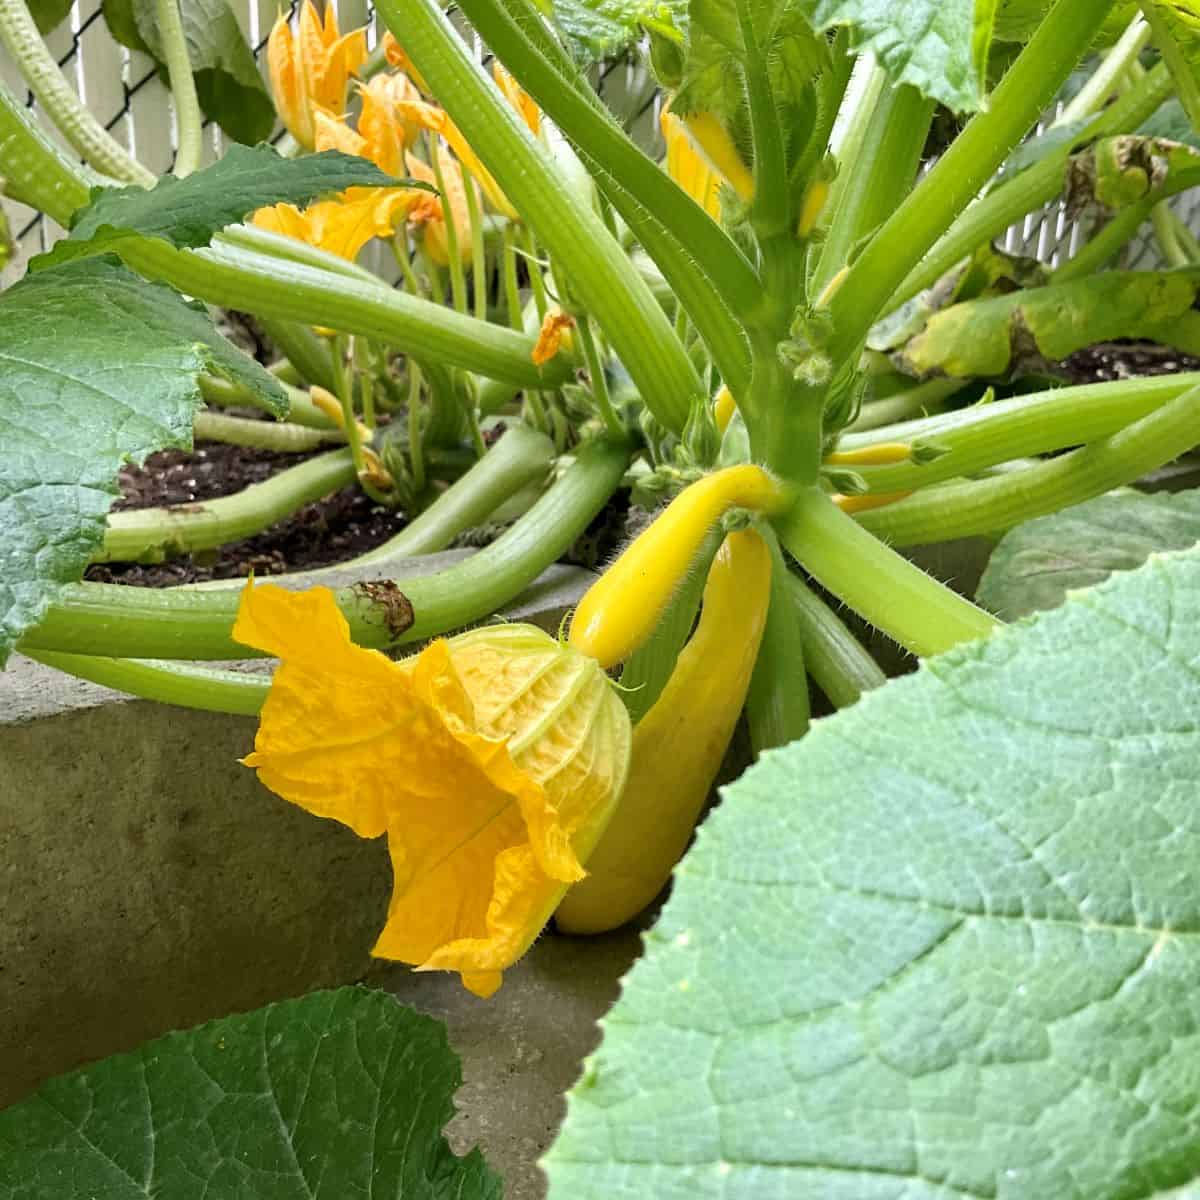 A summer squash with the blossom still attached to it.